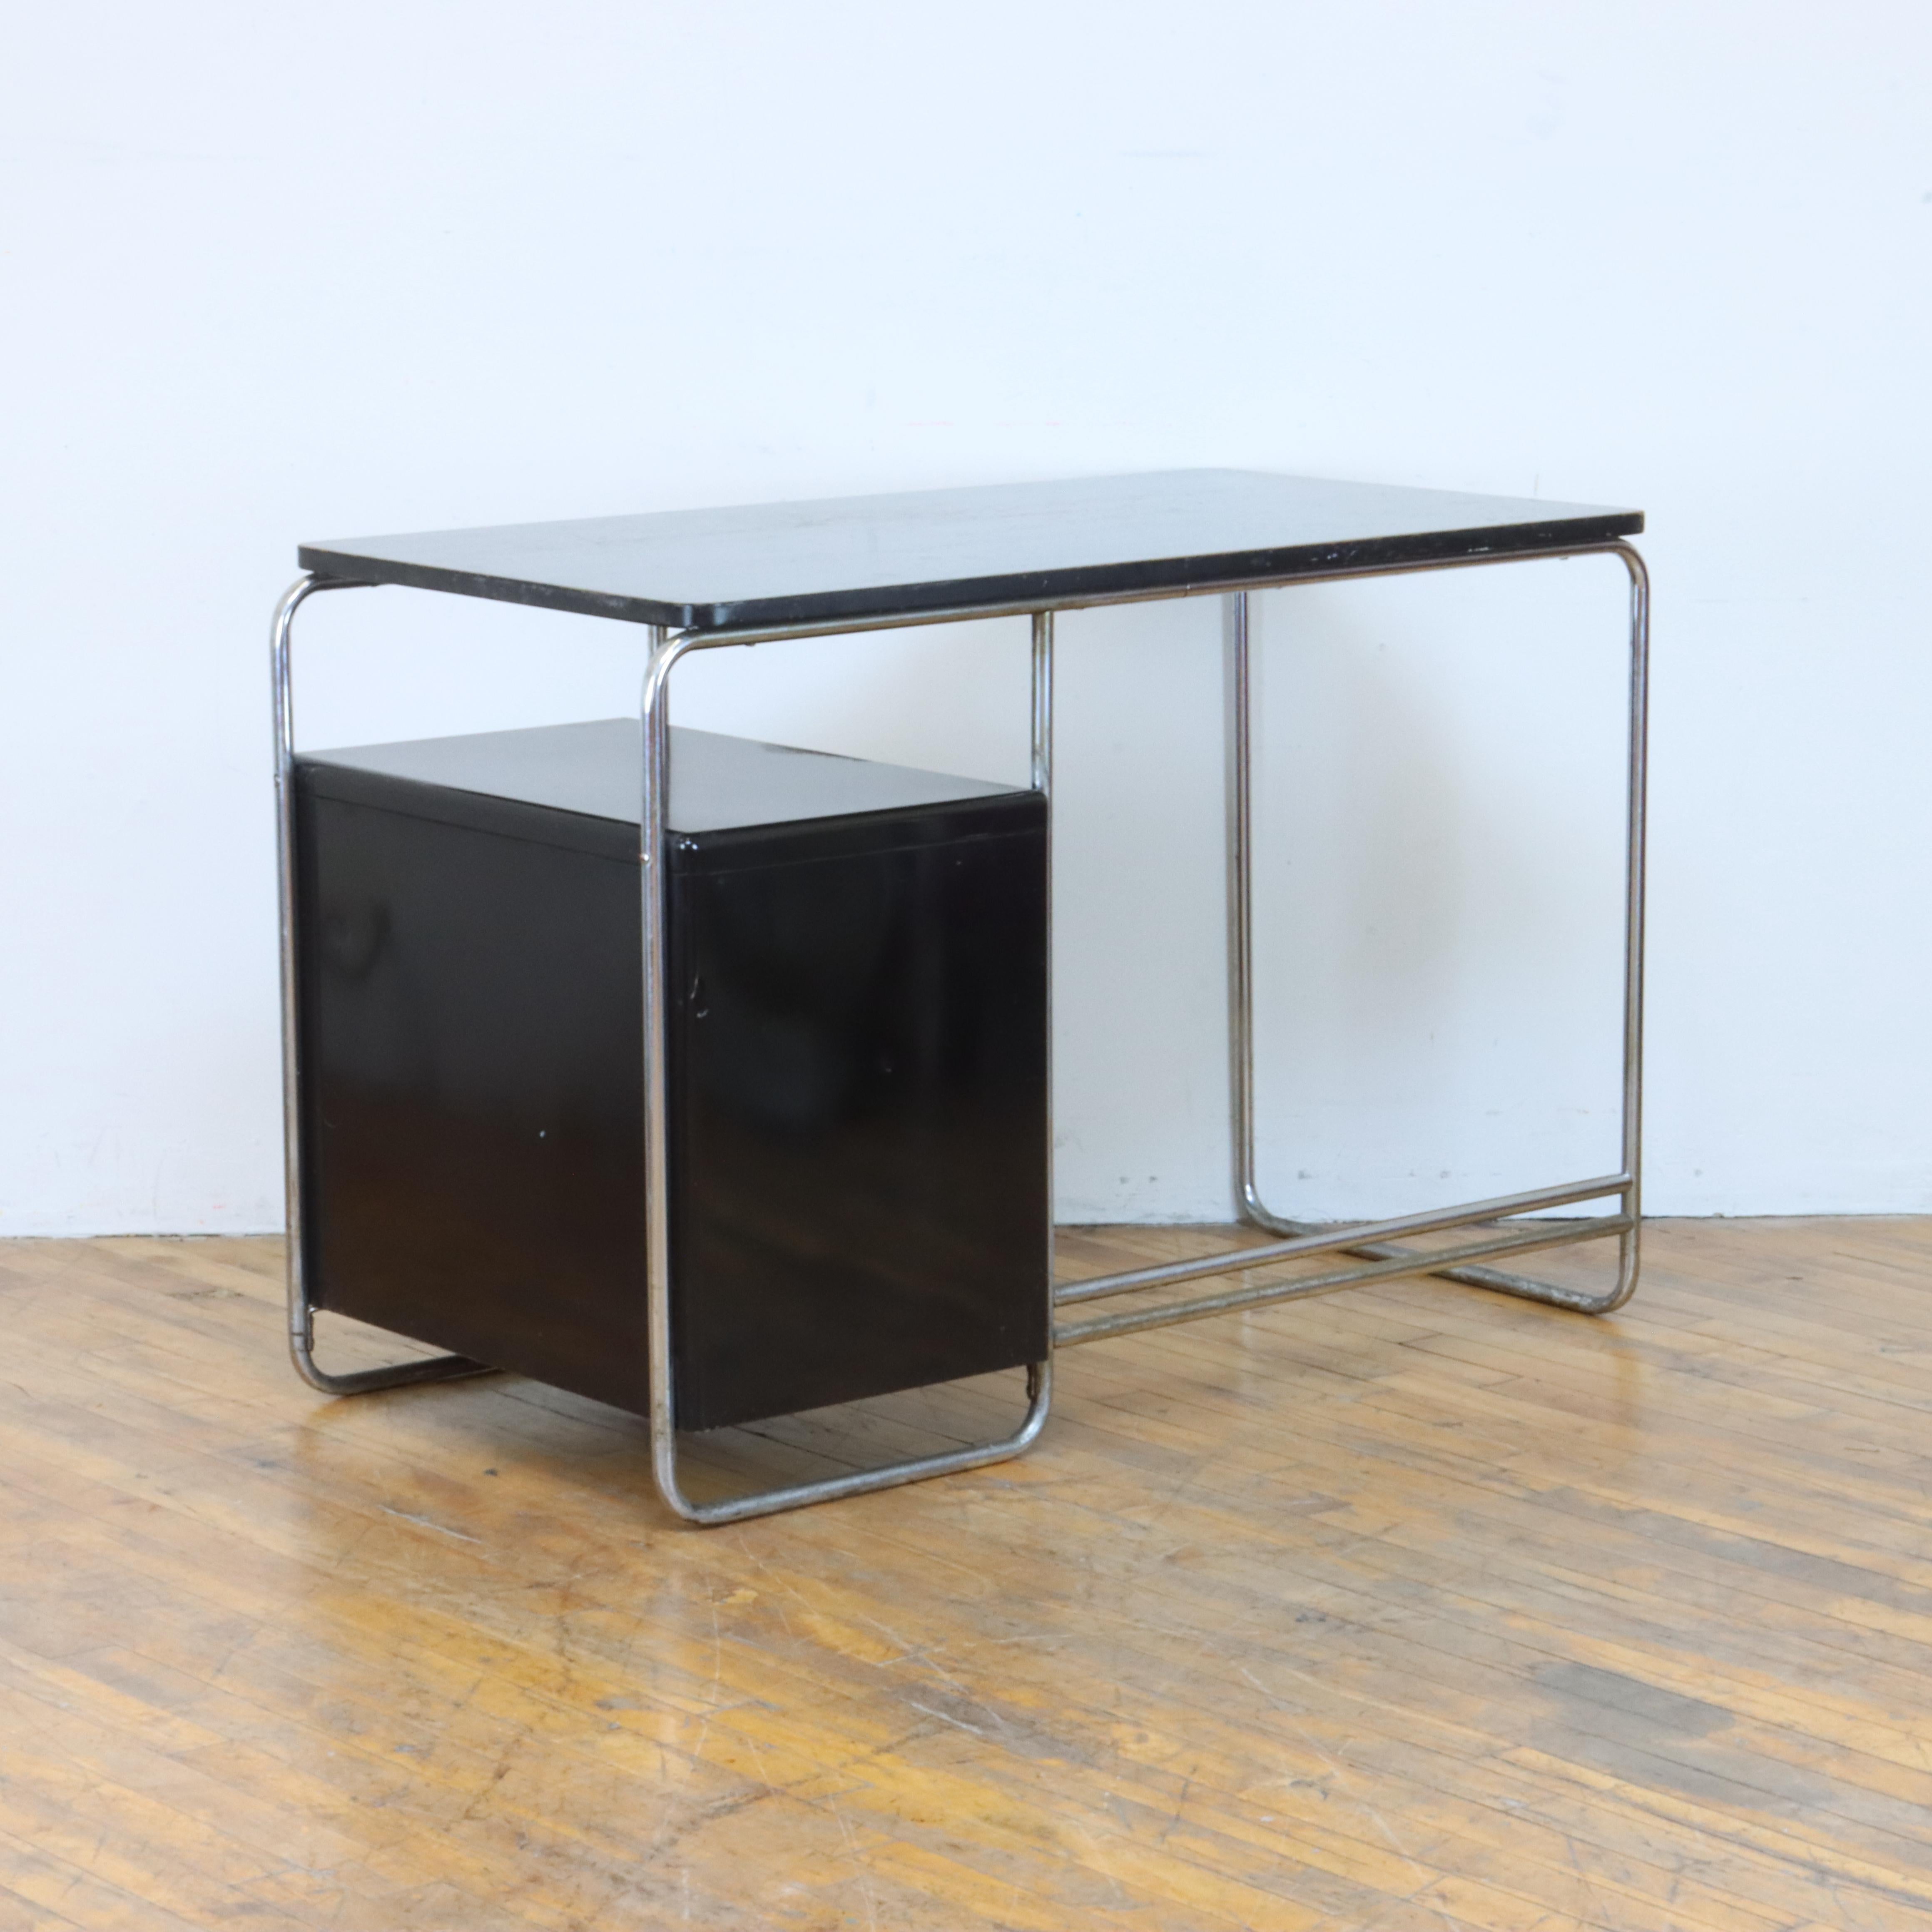 1930s Wolfgang Hoffmann Desk for Howell In Good Condition For Sale In Oakland, CA